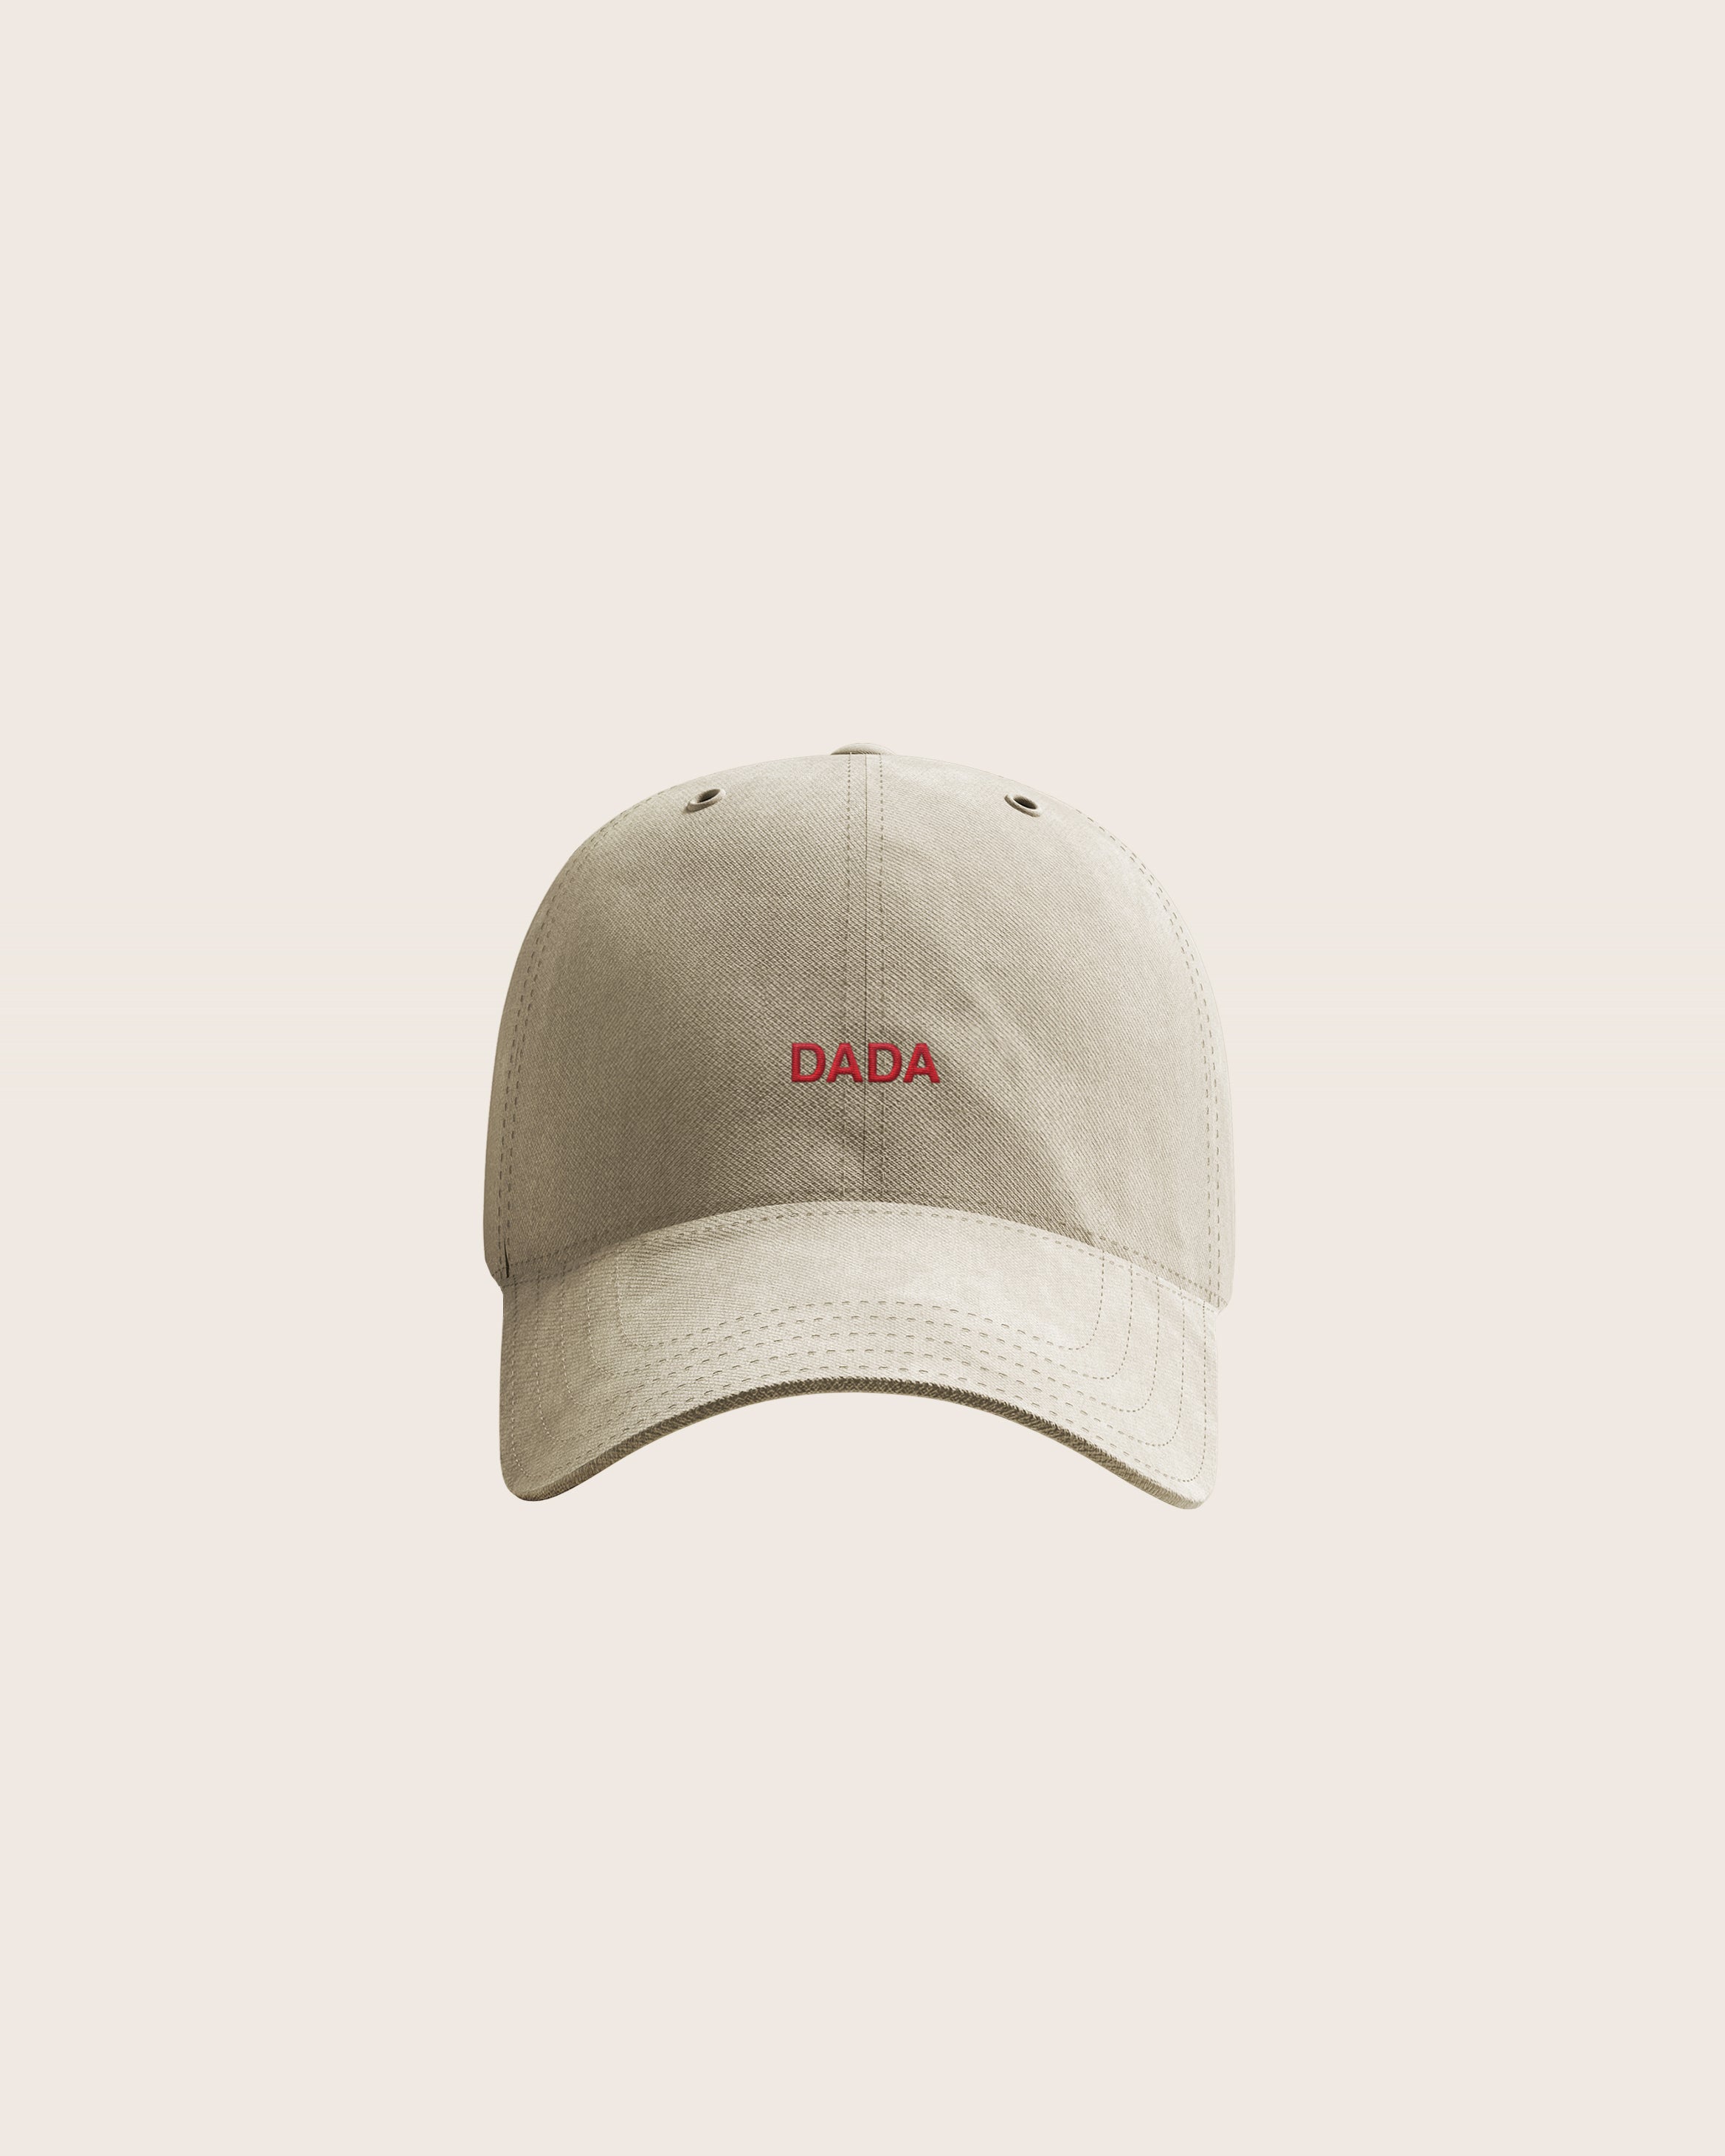 Khaki Baseball Cap / Dad Hat with Dada Art Movement Text Embroidery on Front. 100% Cotton.